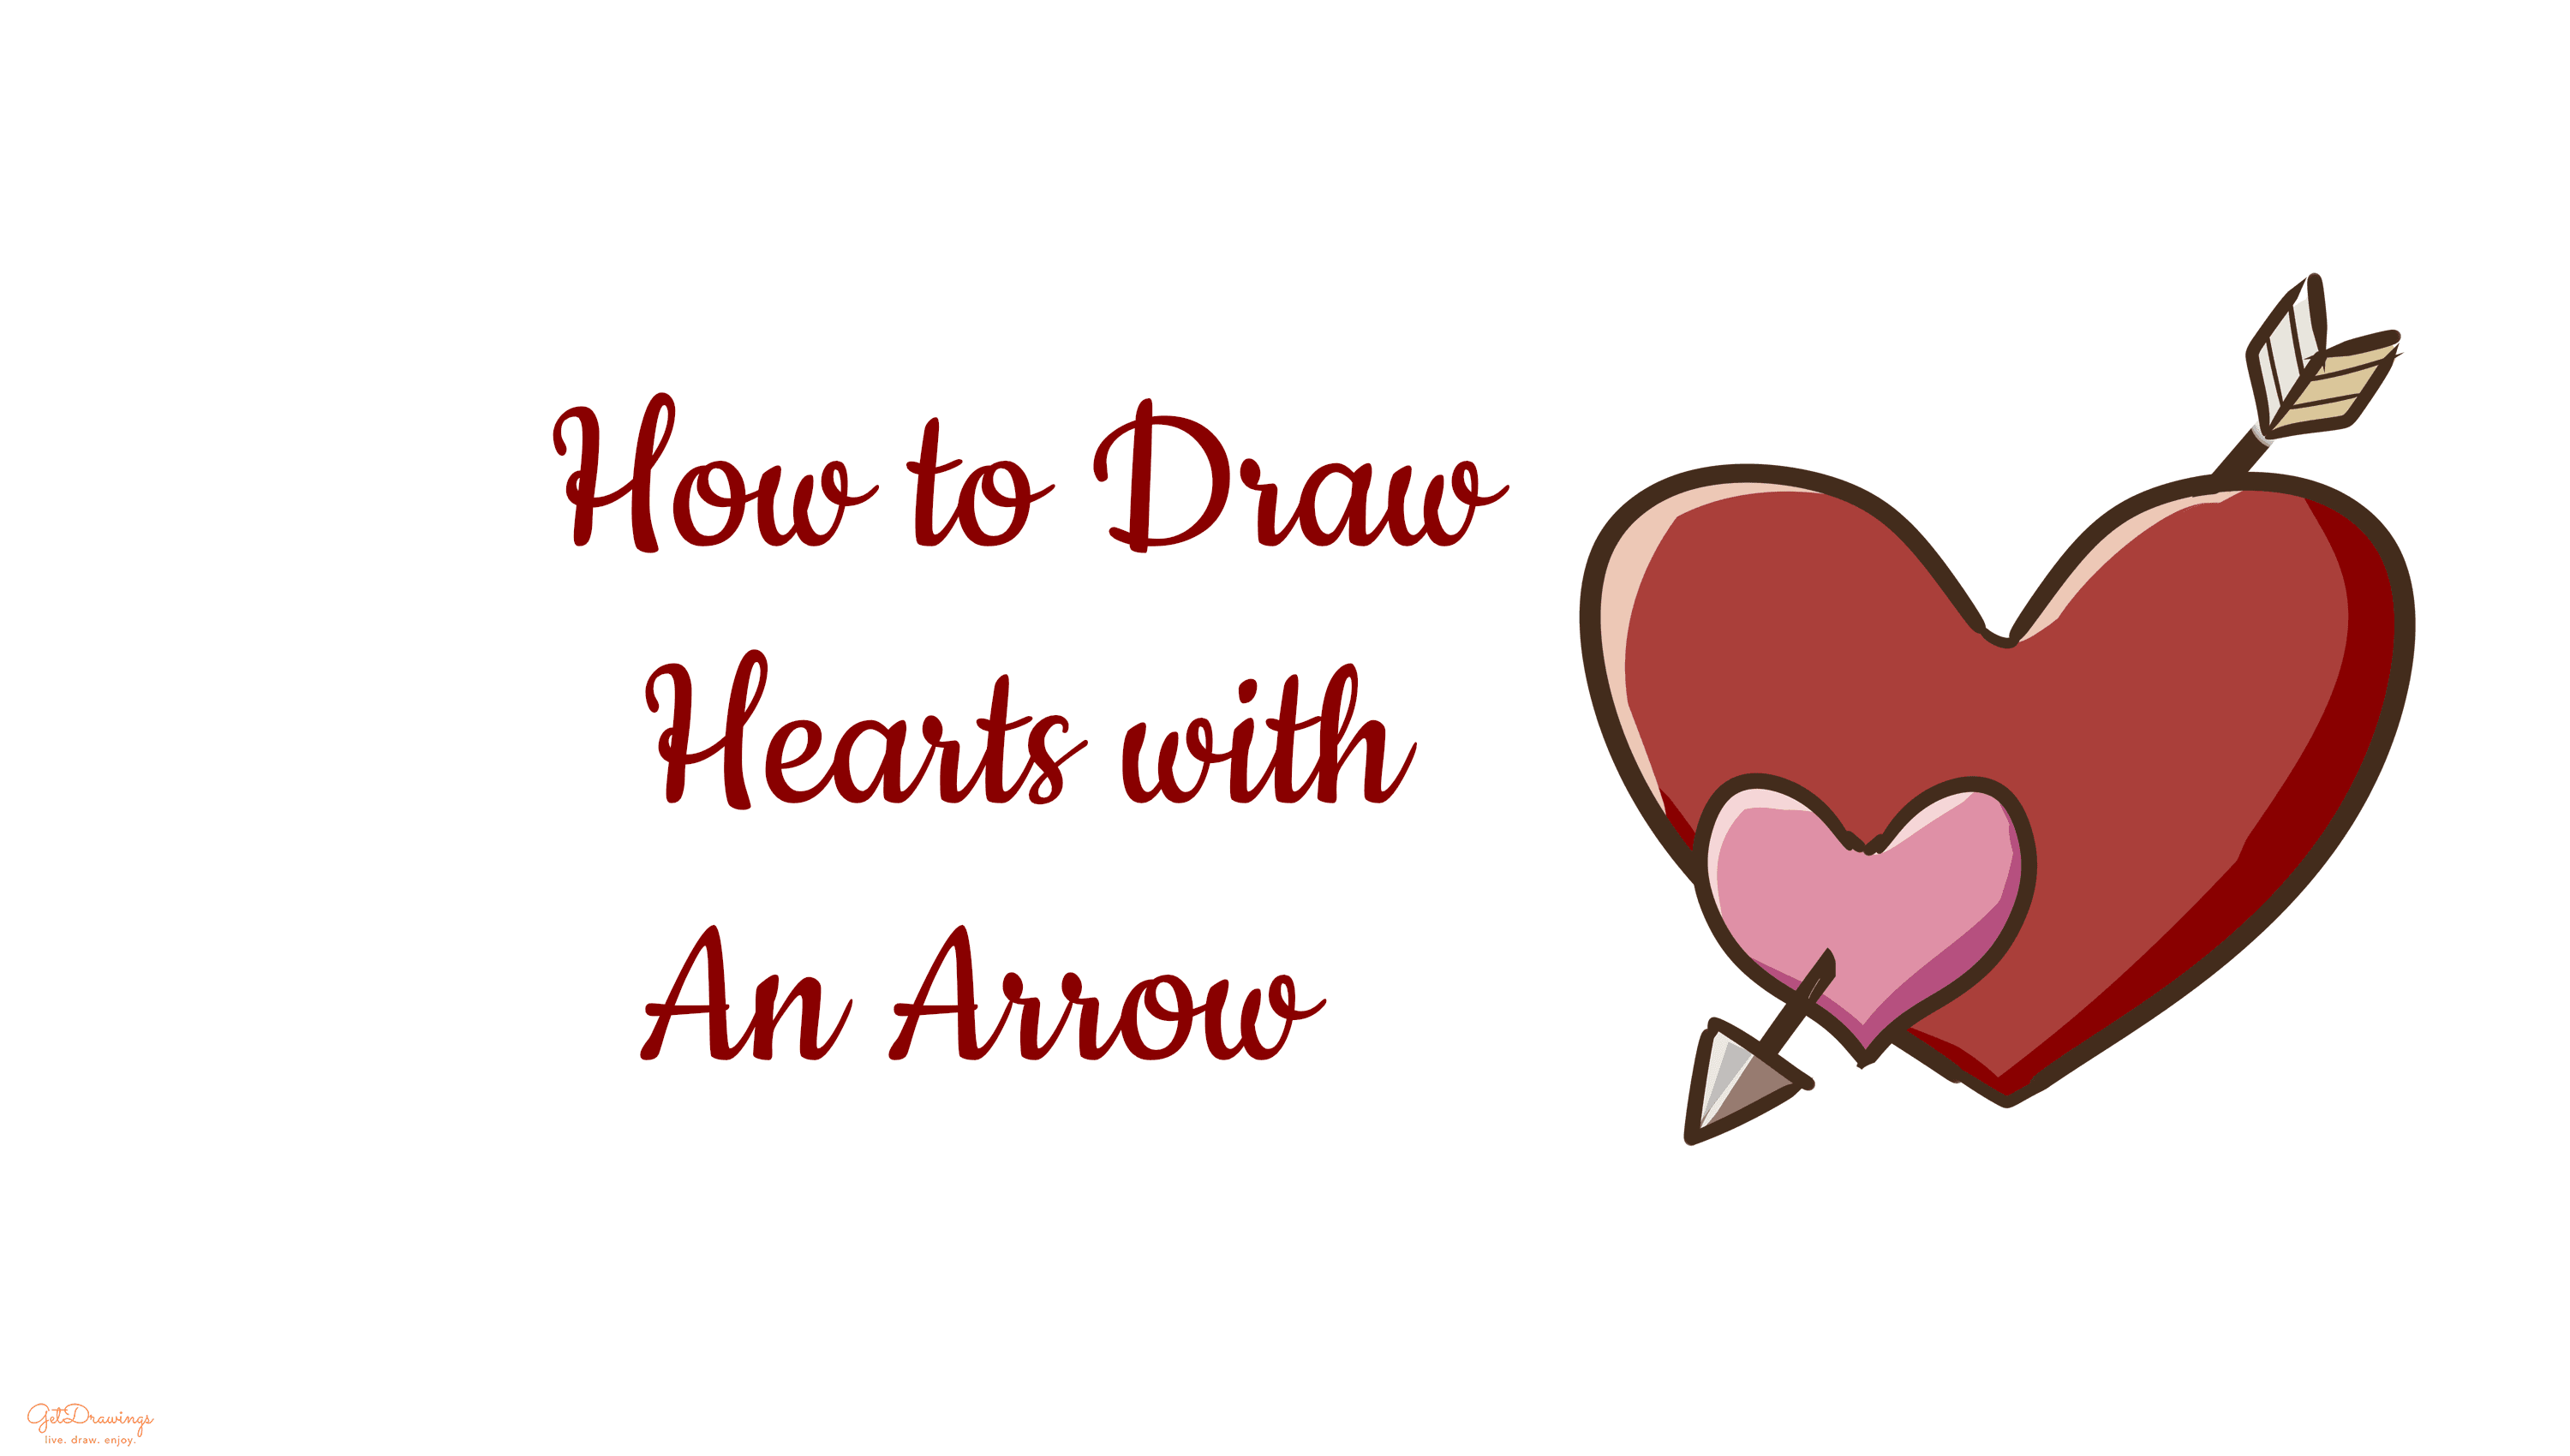 How to draw Hearts with an Arrow